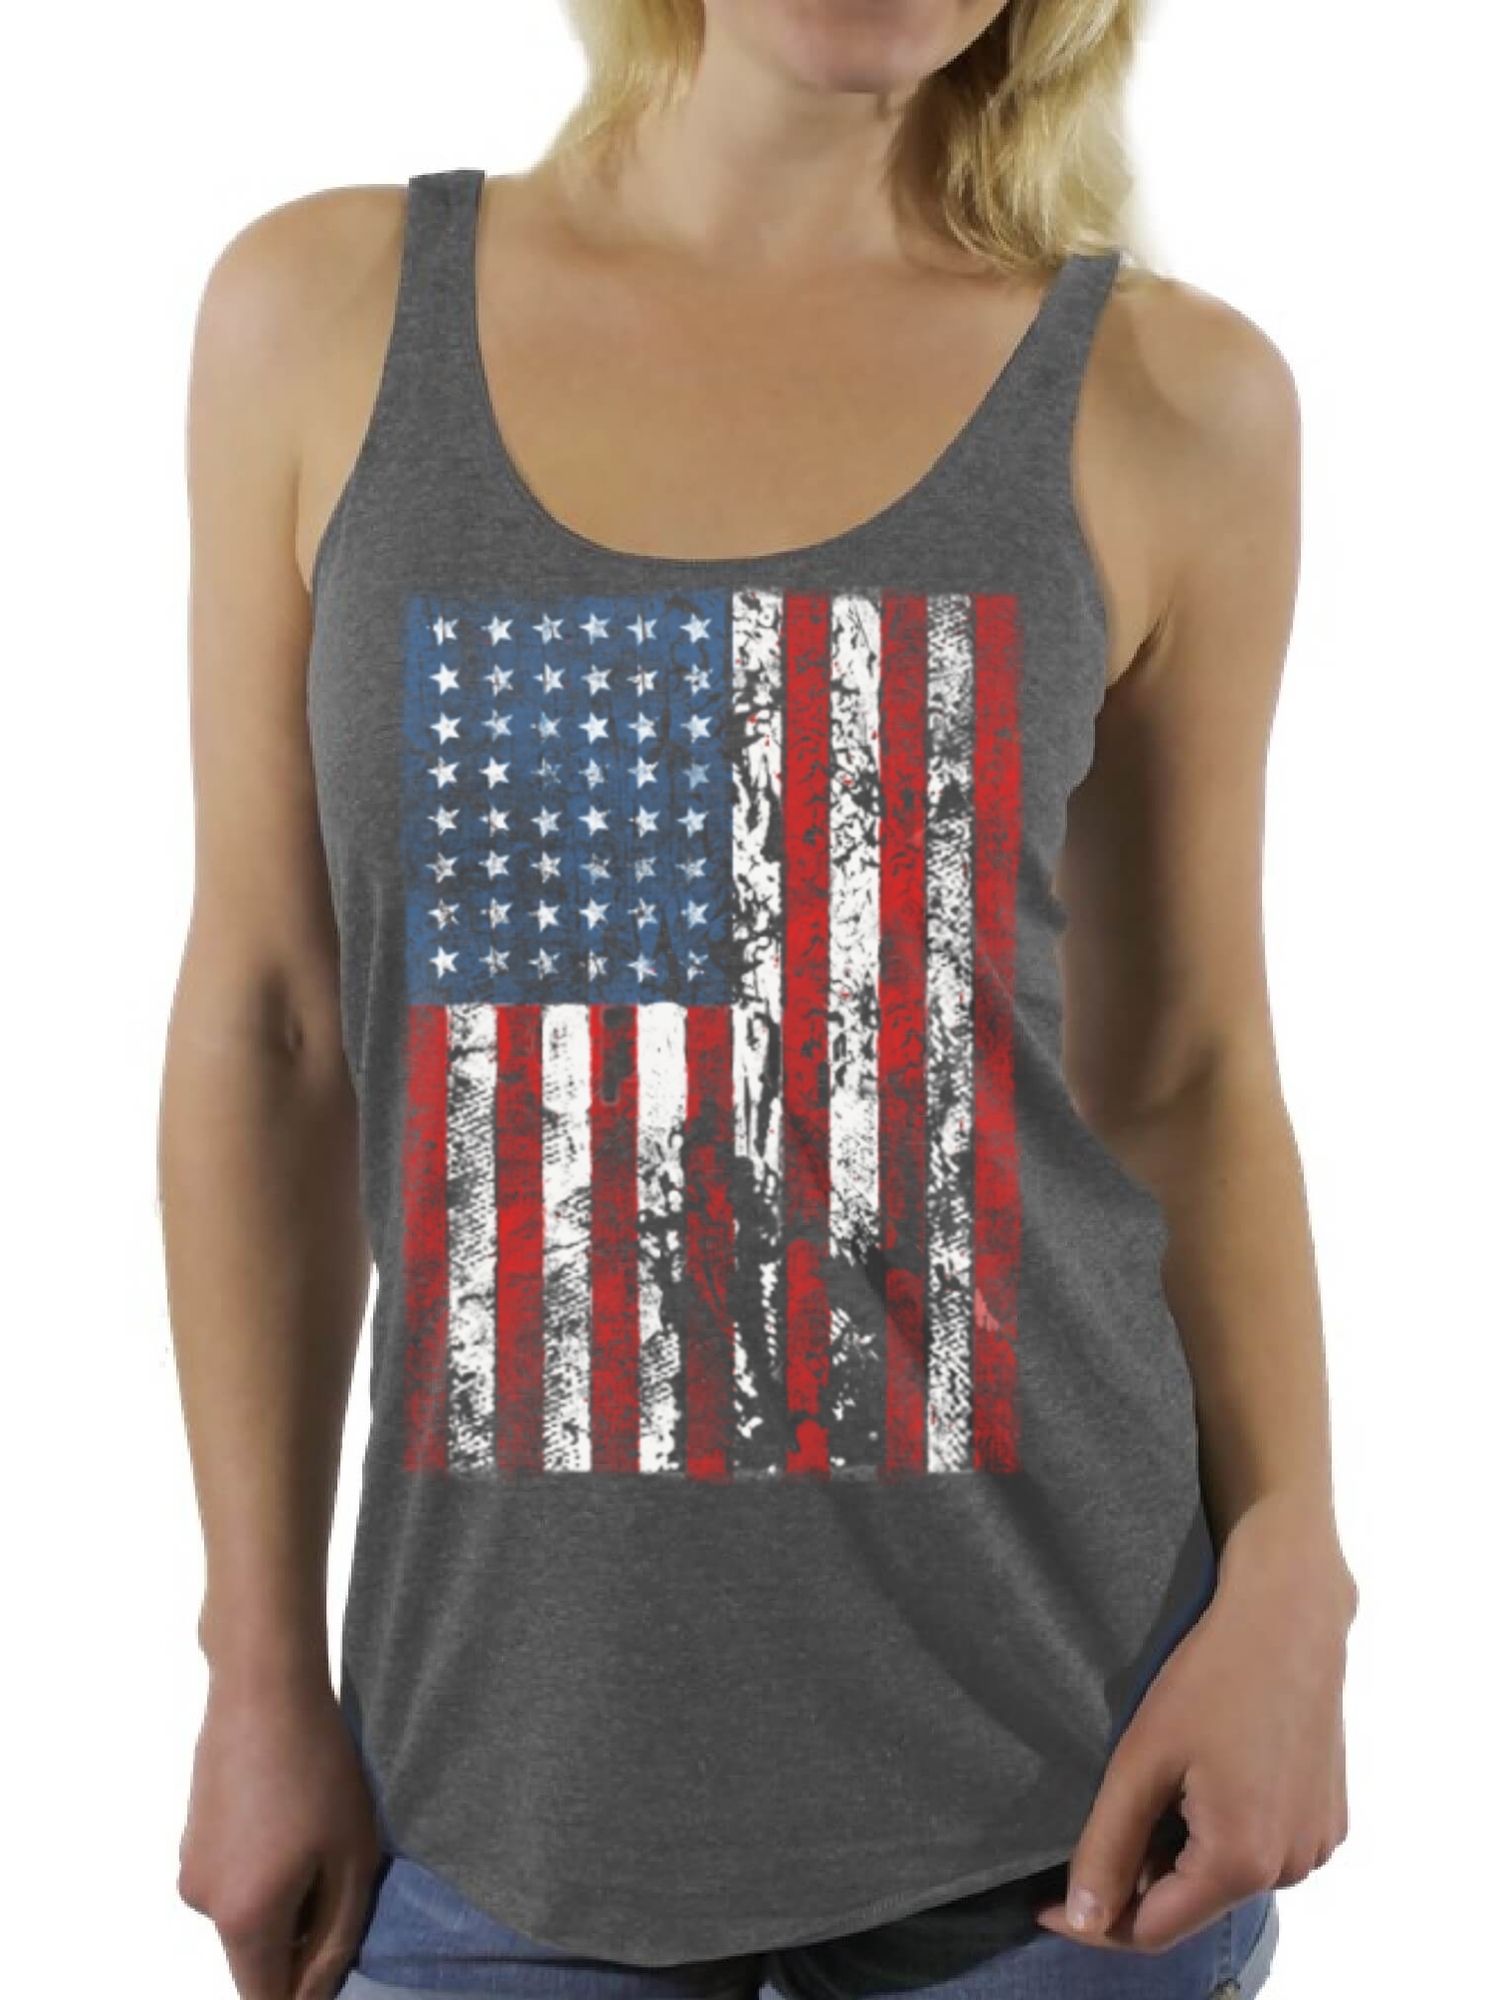 Awkward Styles Women's USA Flag Distressed Graphic Racerback Tank Tops 4th of July Independence Day - image 1 of 4